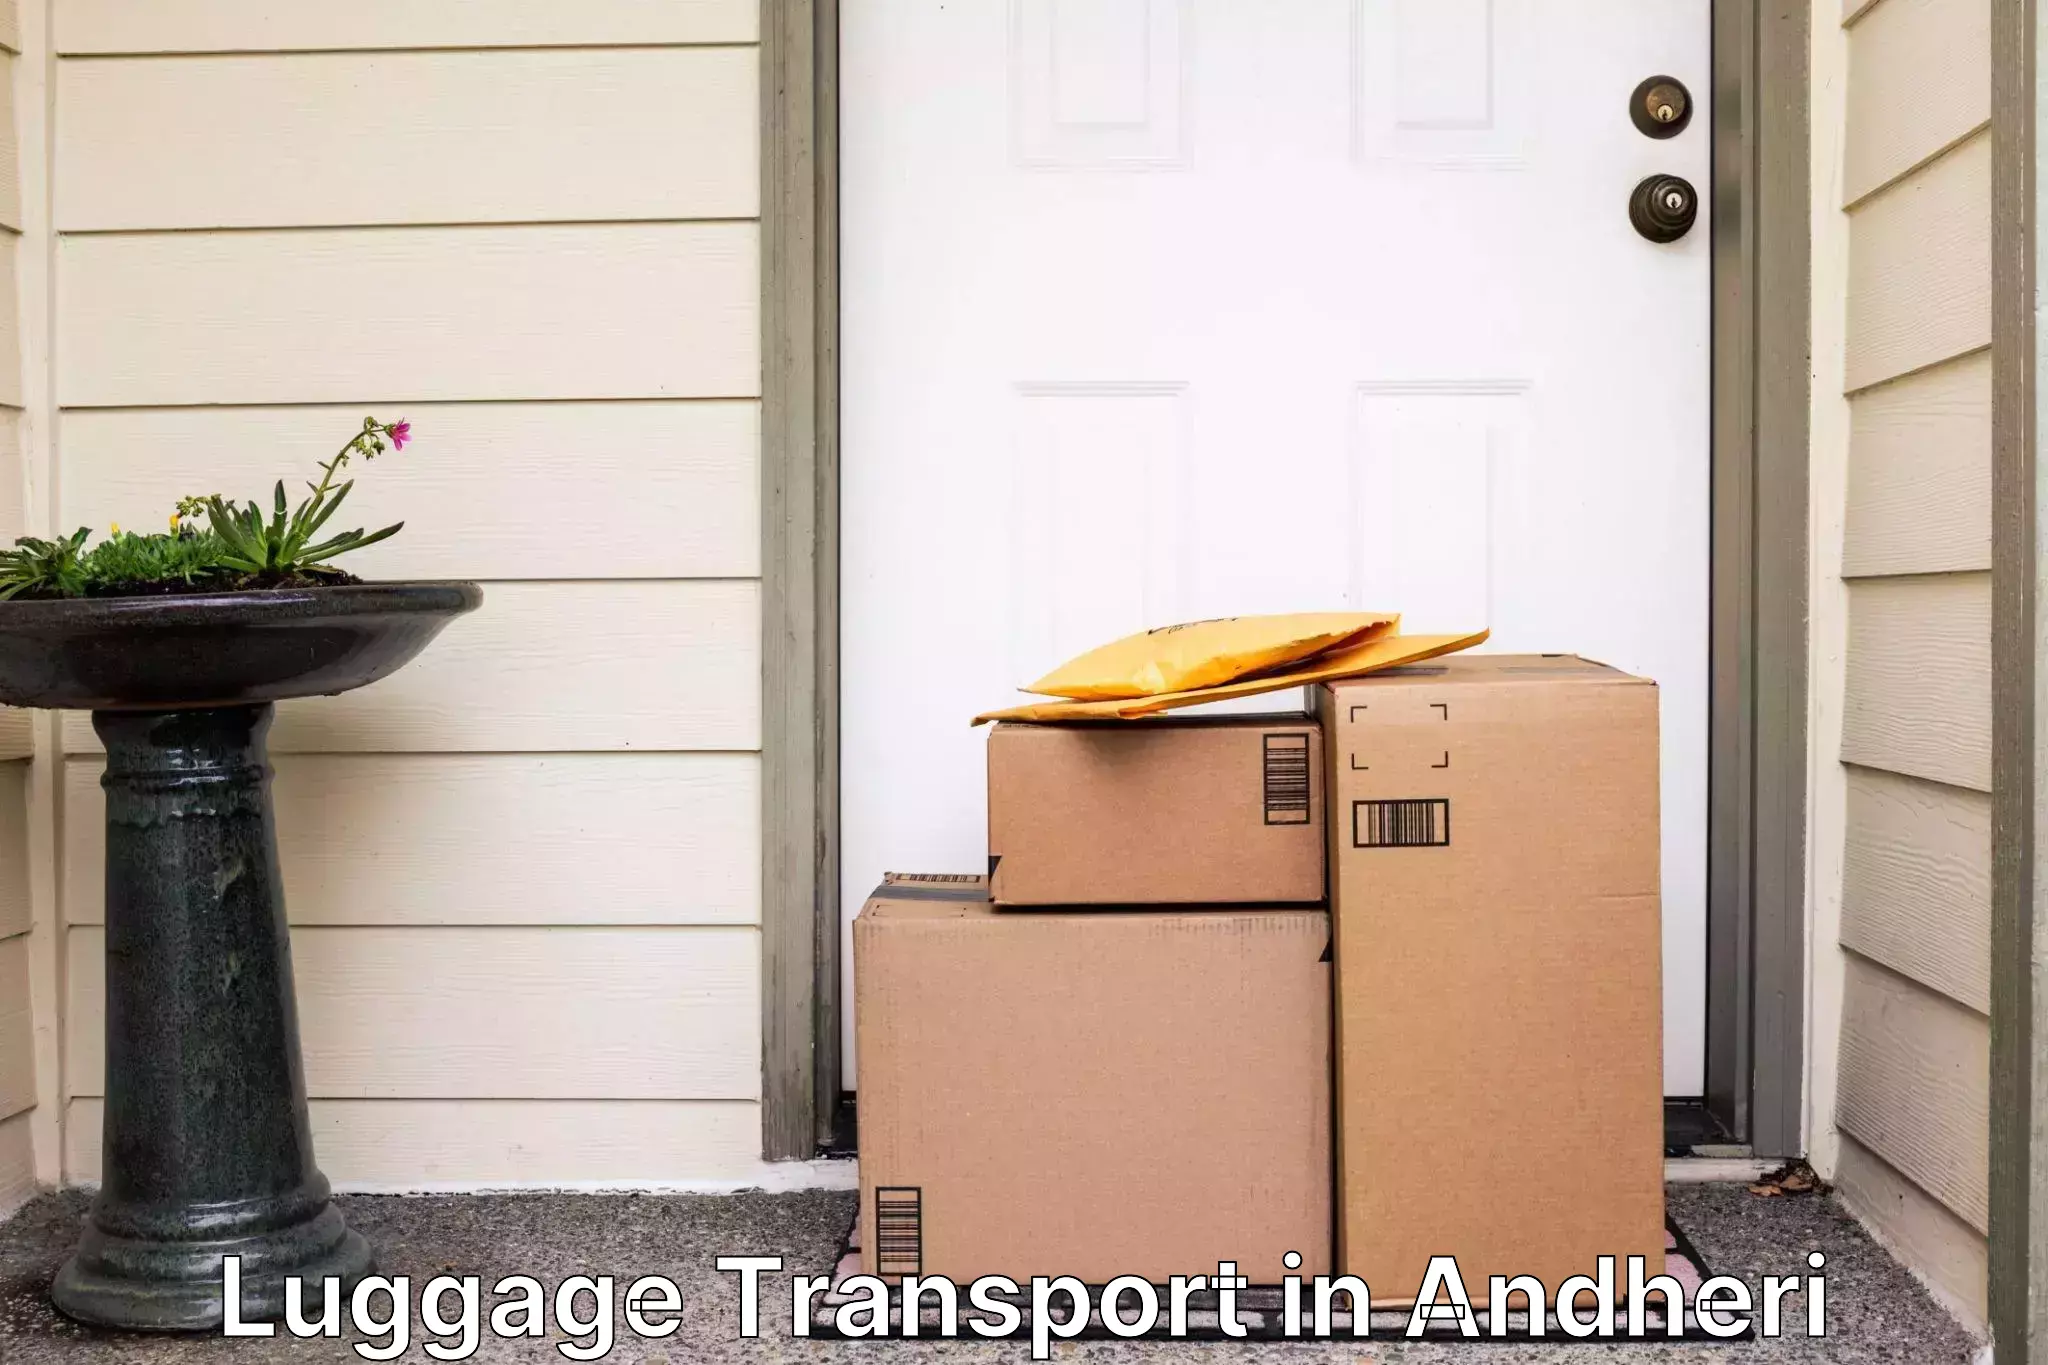 Luggage shipment specialists in Andheri